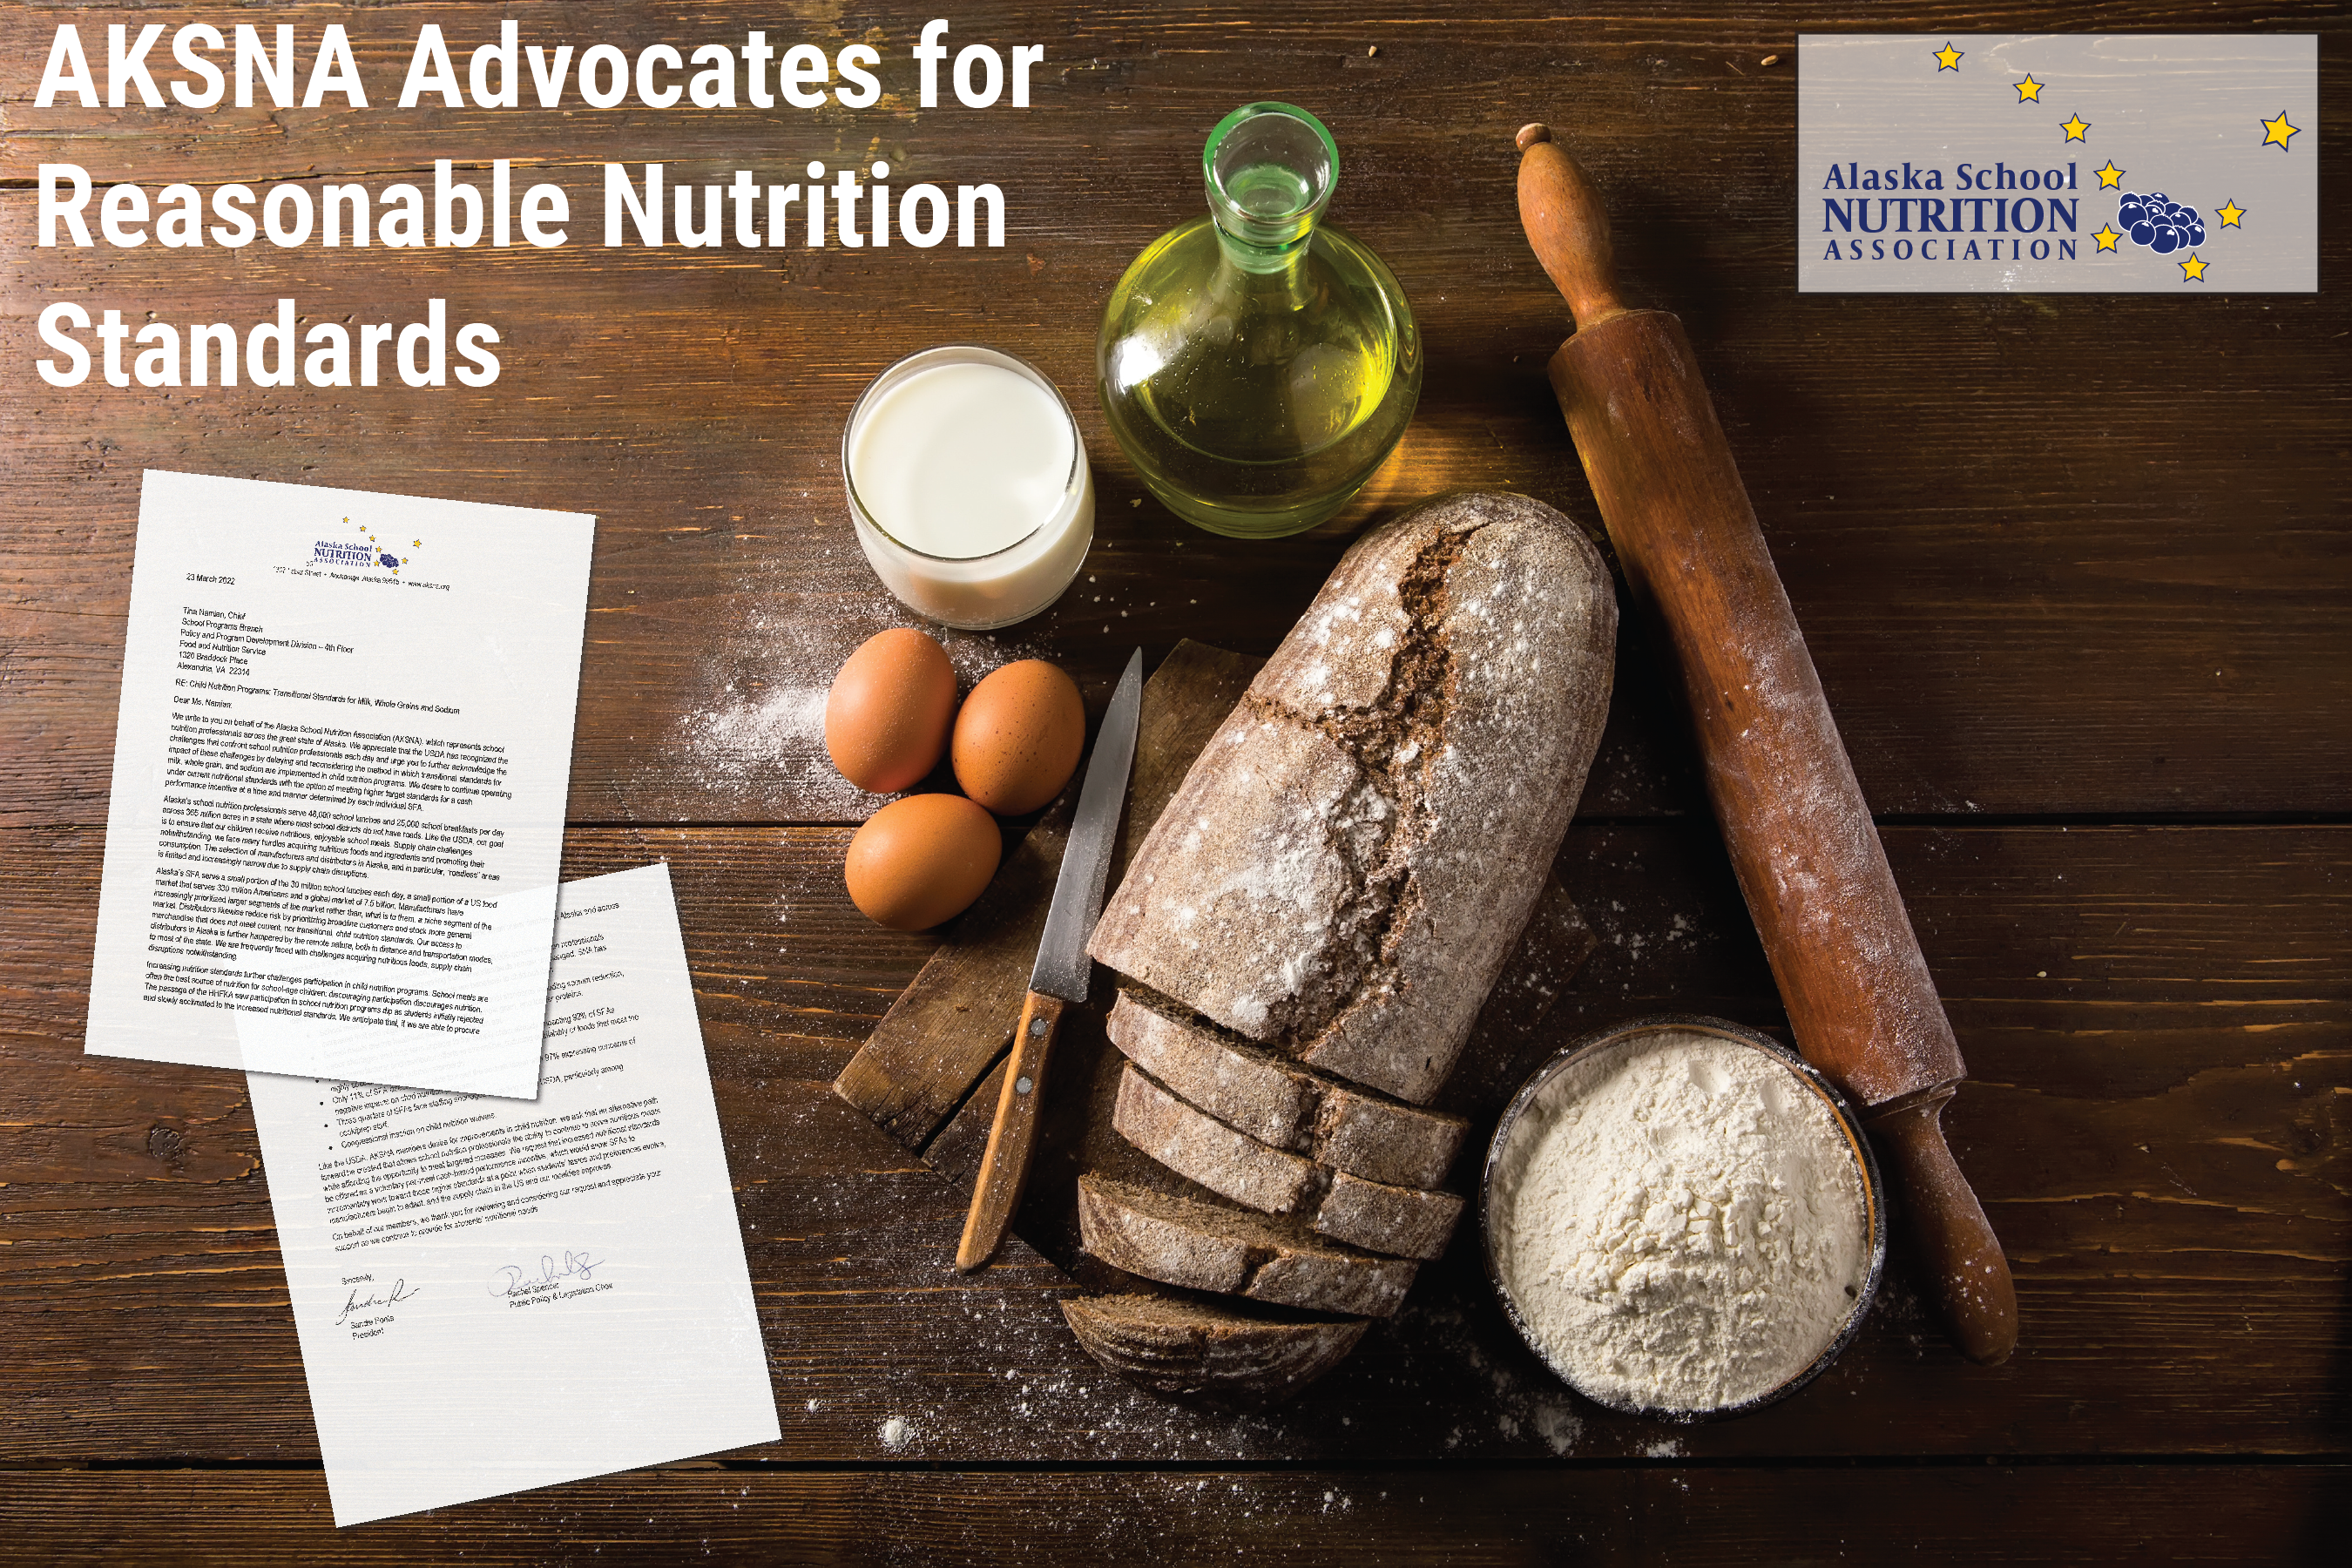 AKSNA Advocates for Reasonable Nutrition Standards